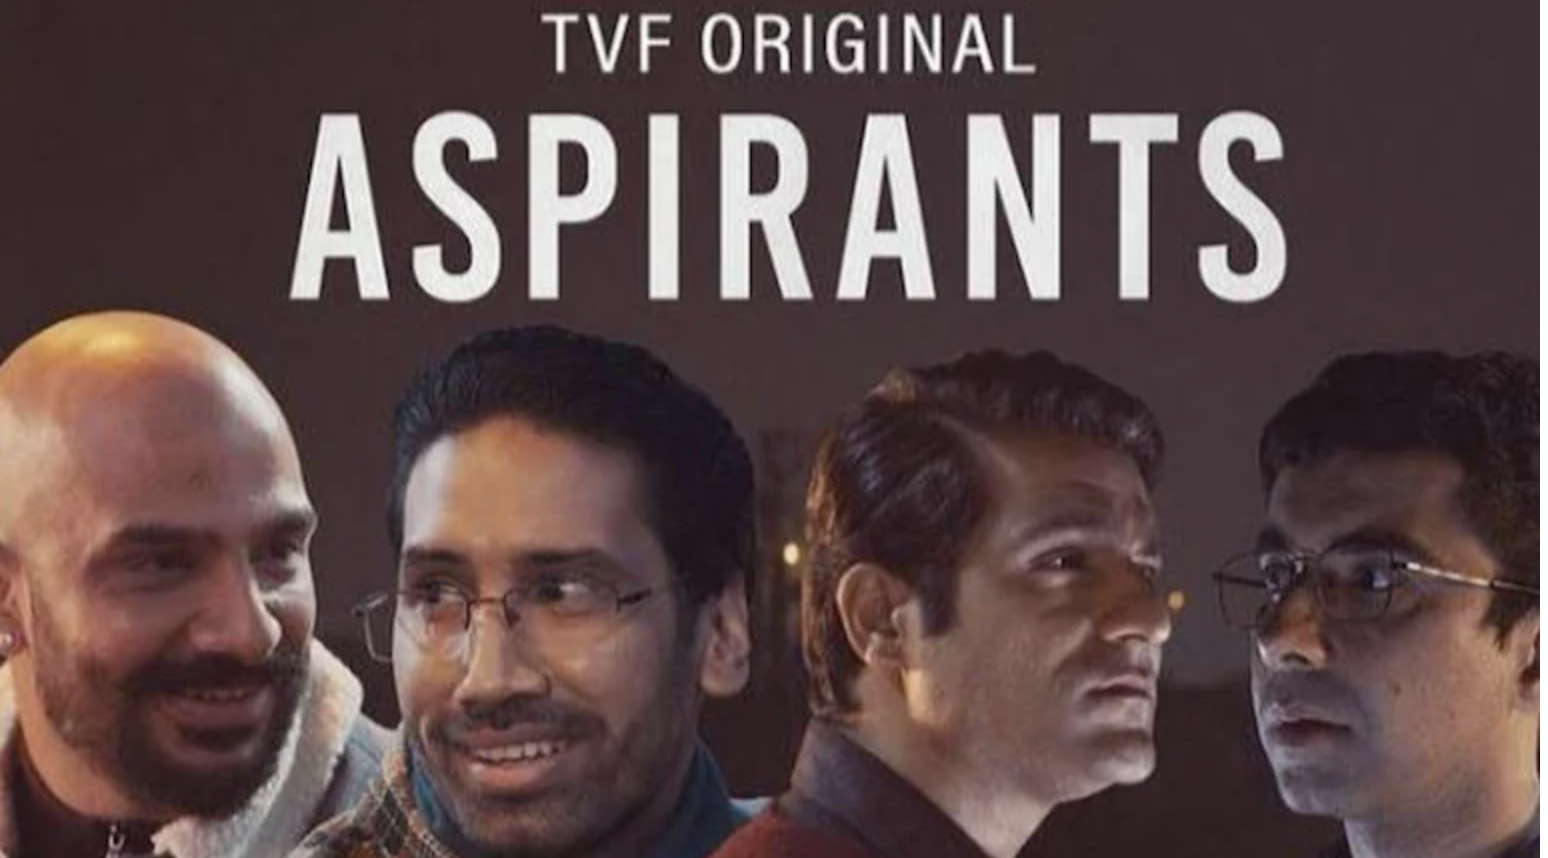 TVF's Aspirants in plagiarism row. Dark Horse writer says series lifted from his book